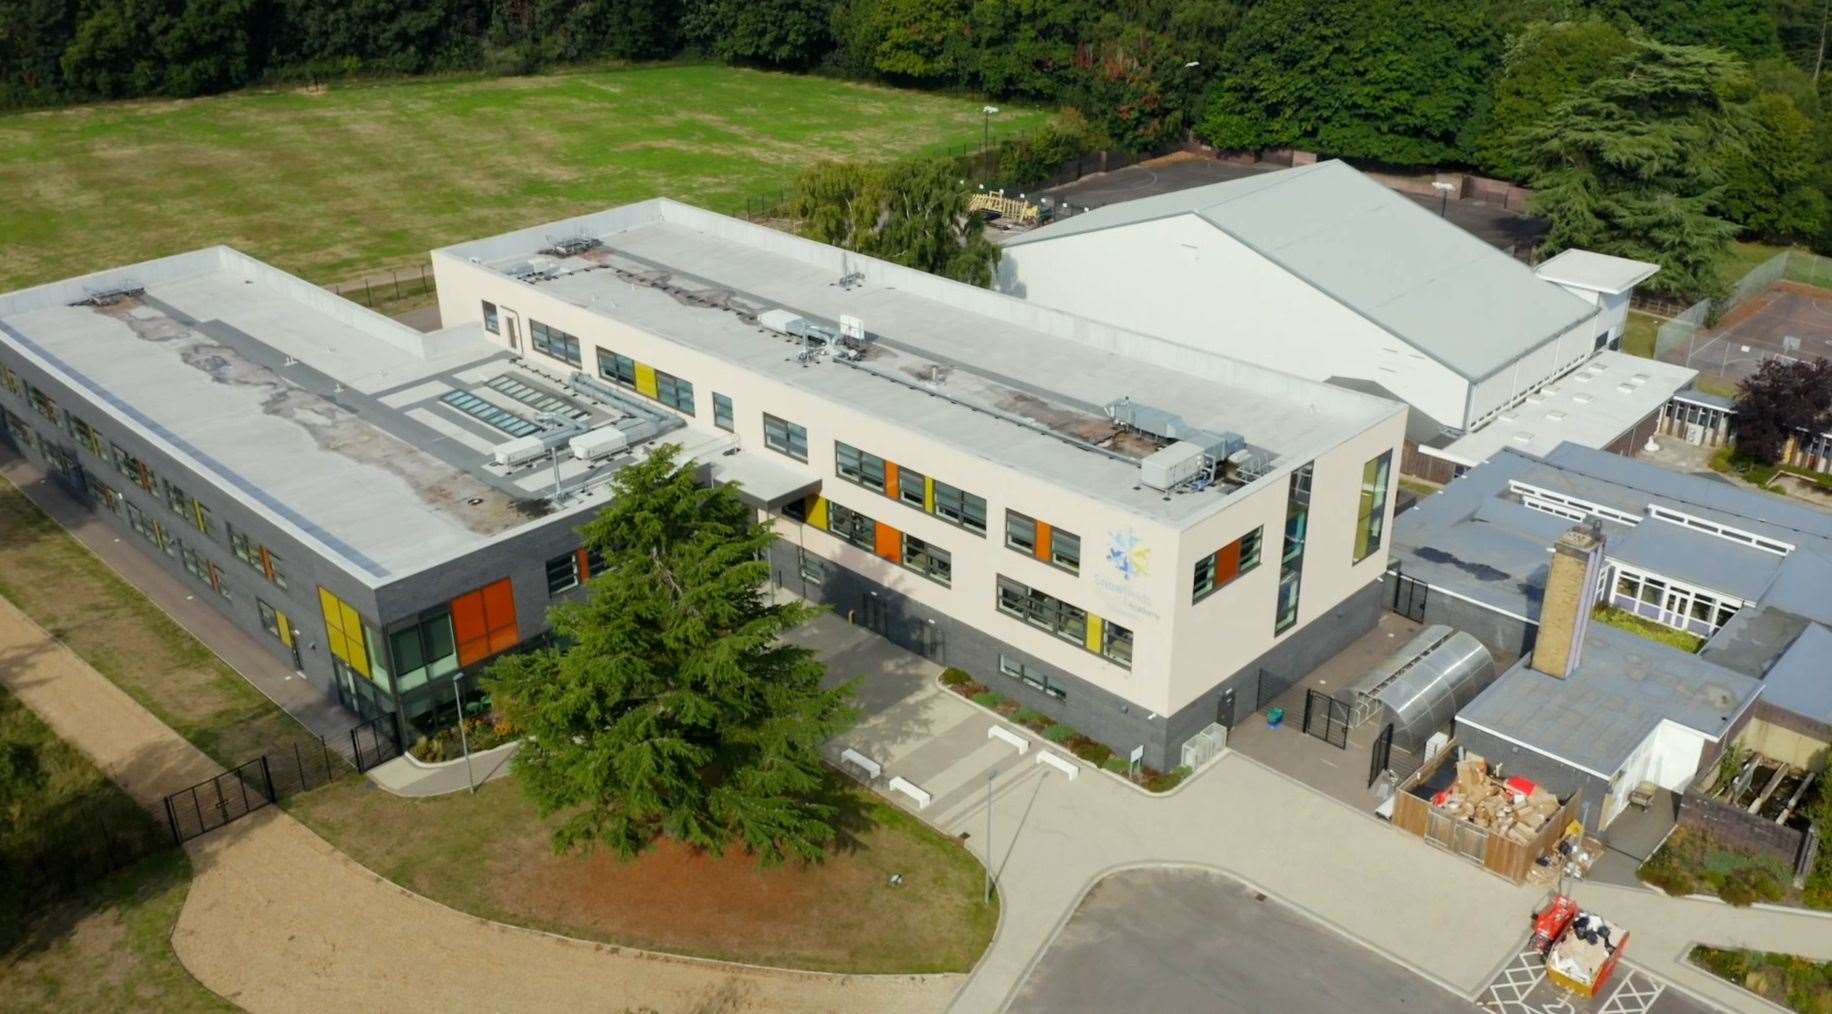 Snowfields replaced the High Weald Academy in Cranbrook